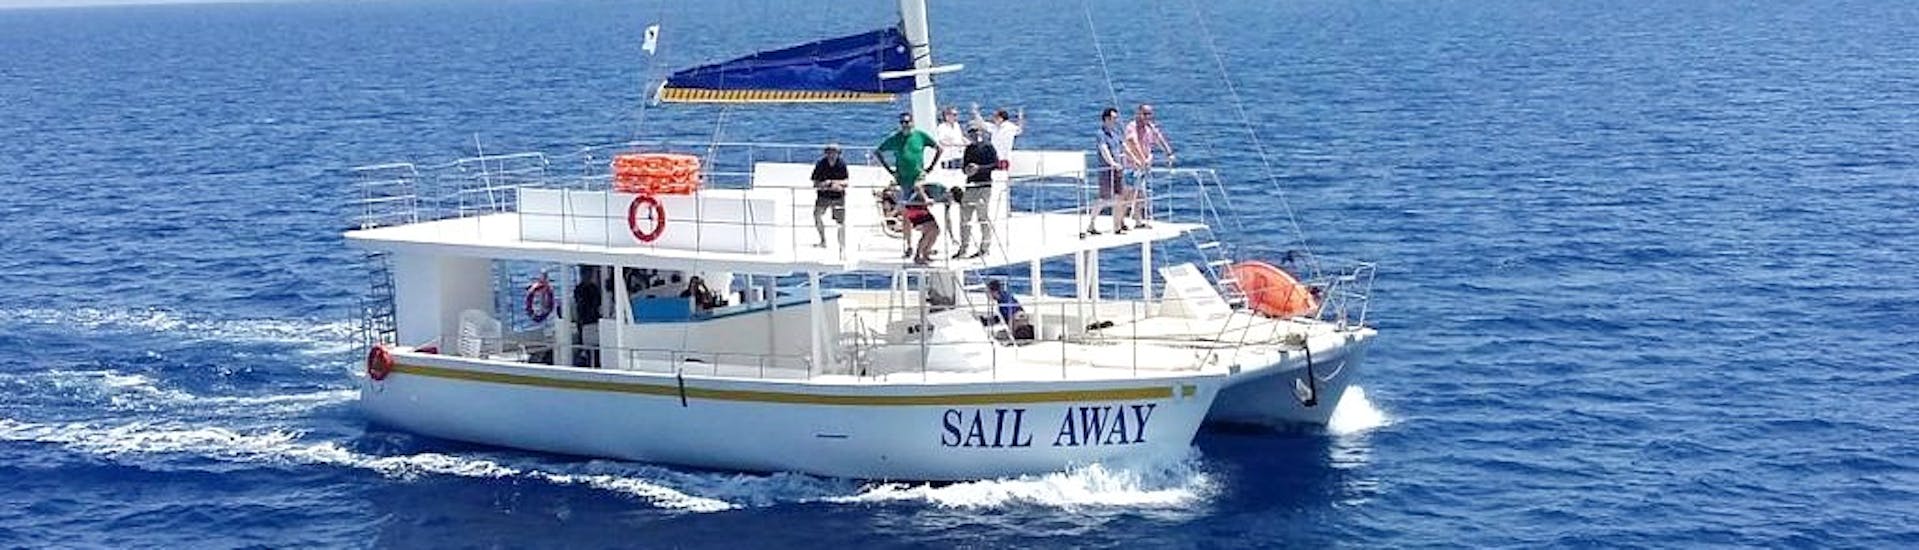 Picture of the Sail Away catamaran used by Relax-Cruises Limassol for the tours.